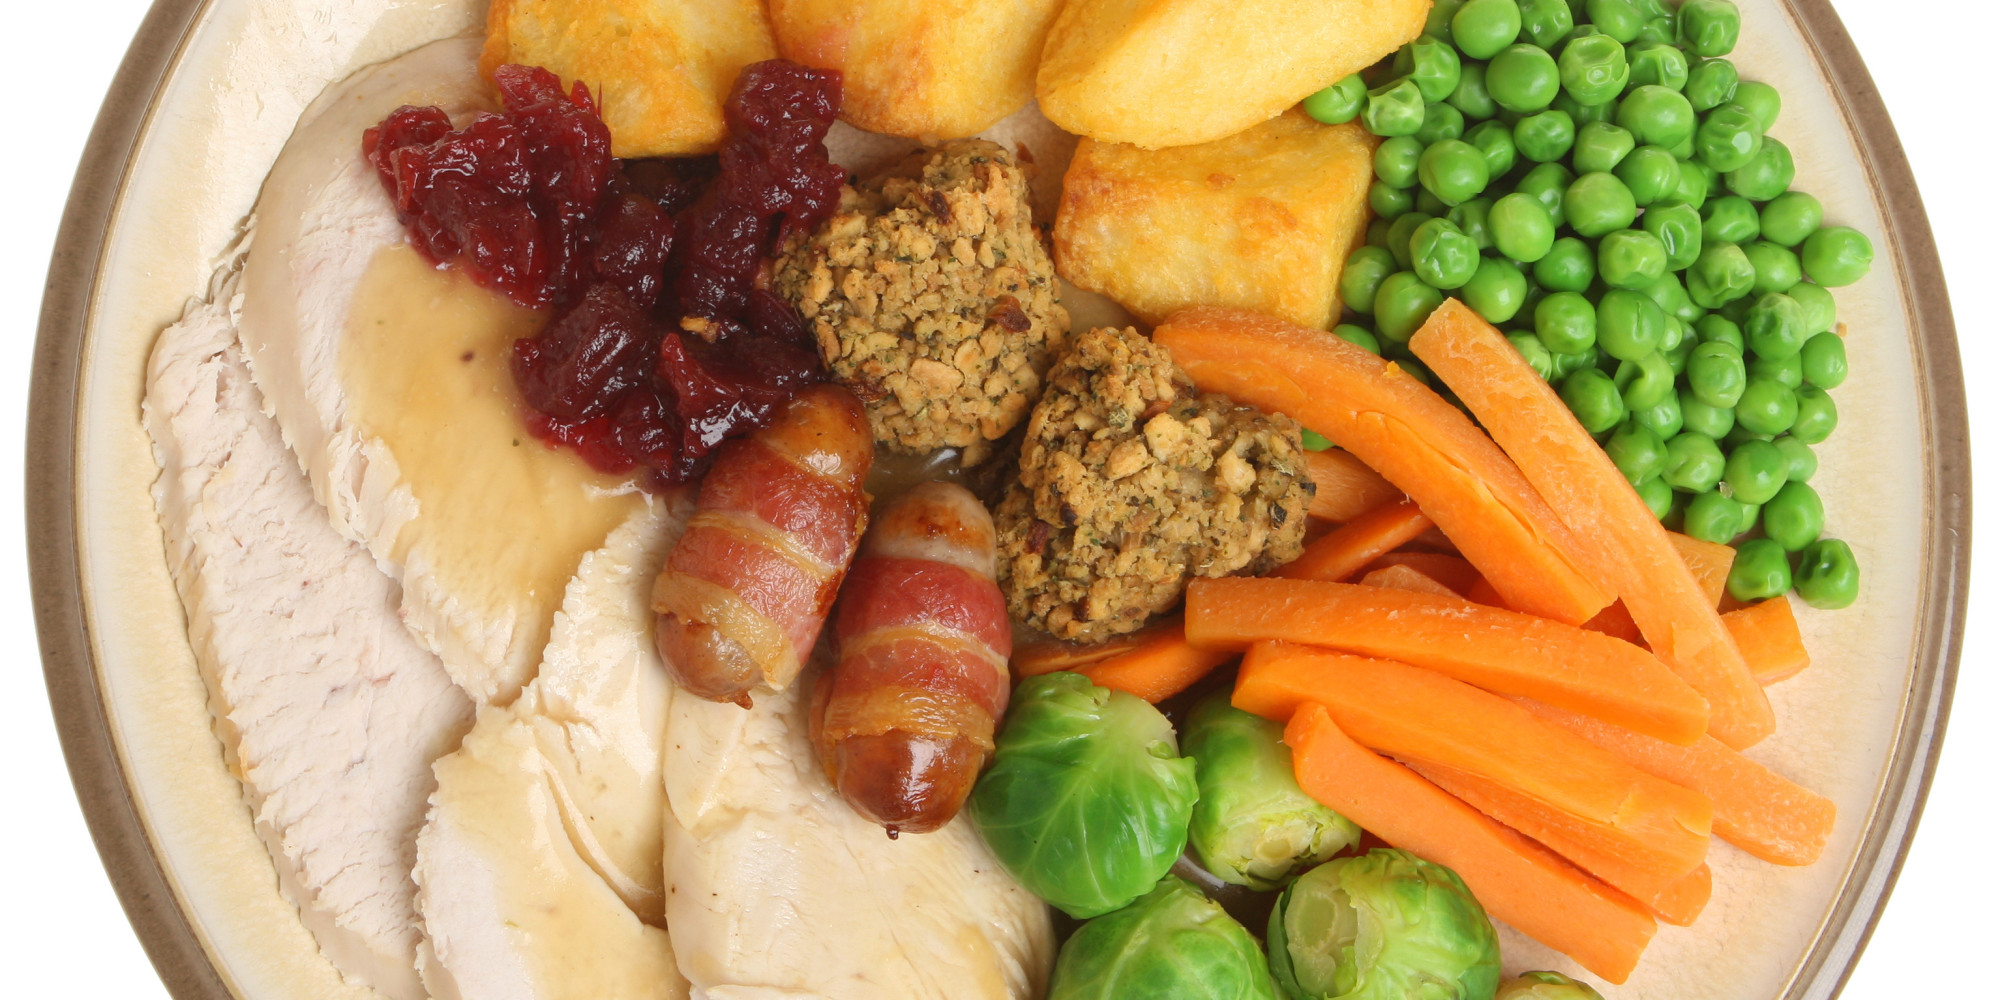 Your Christmas Meal In 200 Calories | HuffPost UK